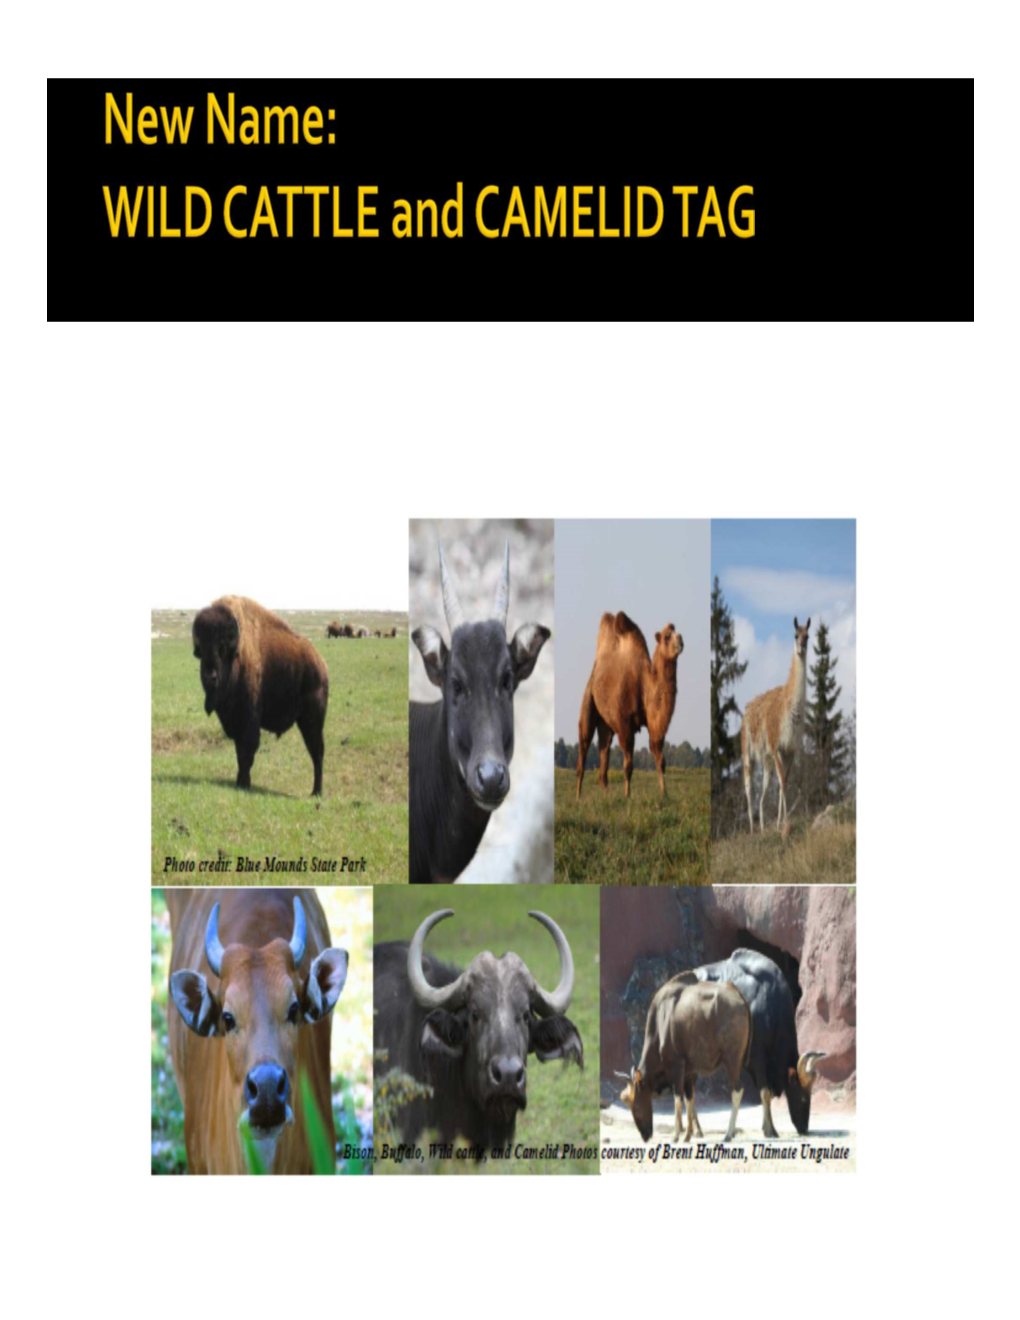 AZA Cattle TAG Midyear Updates 2015